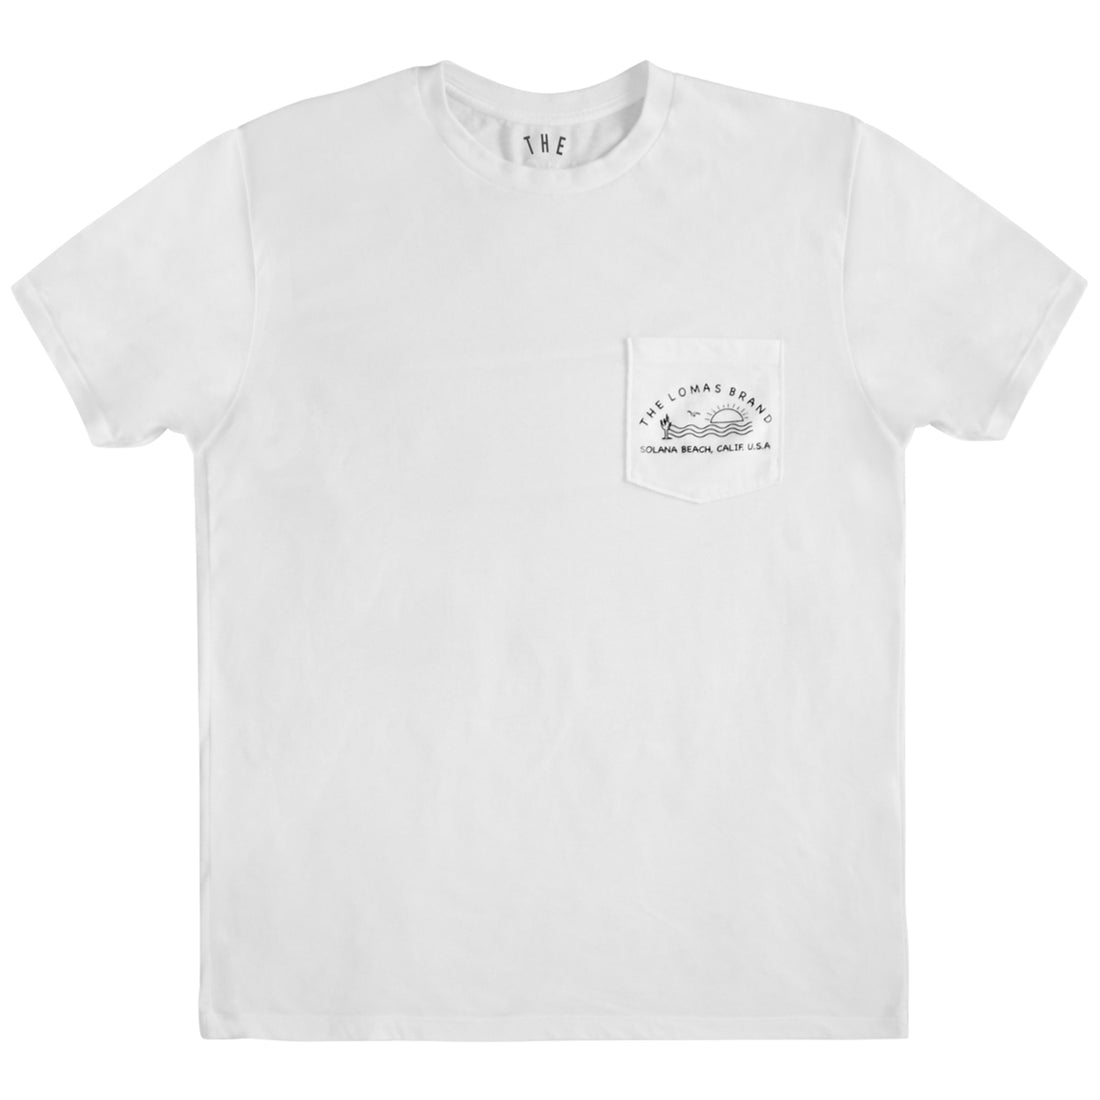 Your Local Pocket Tee - White - The Lomas Brand